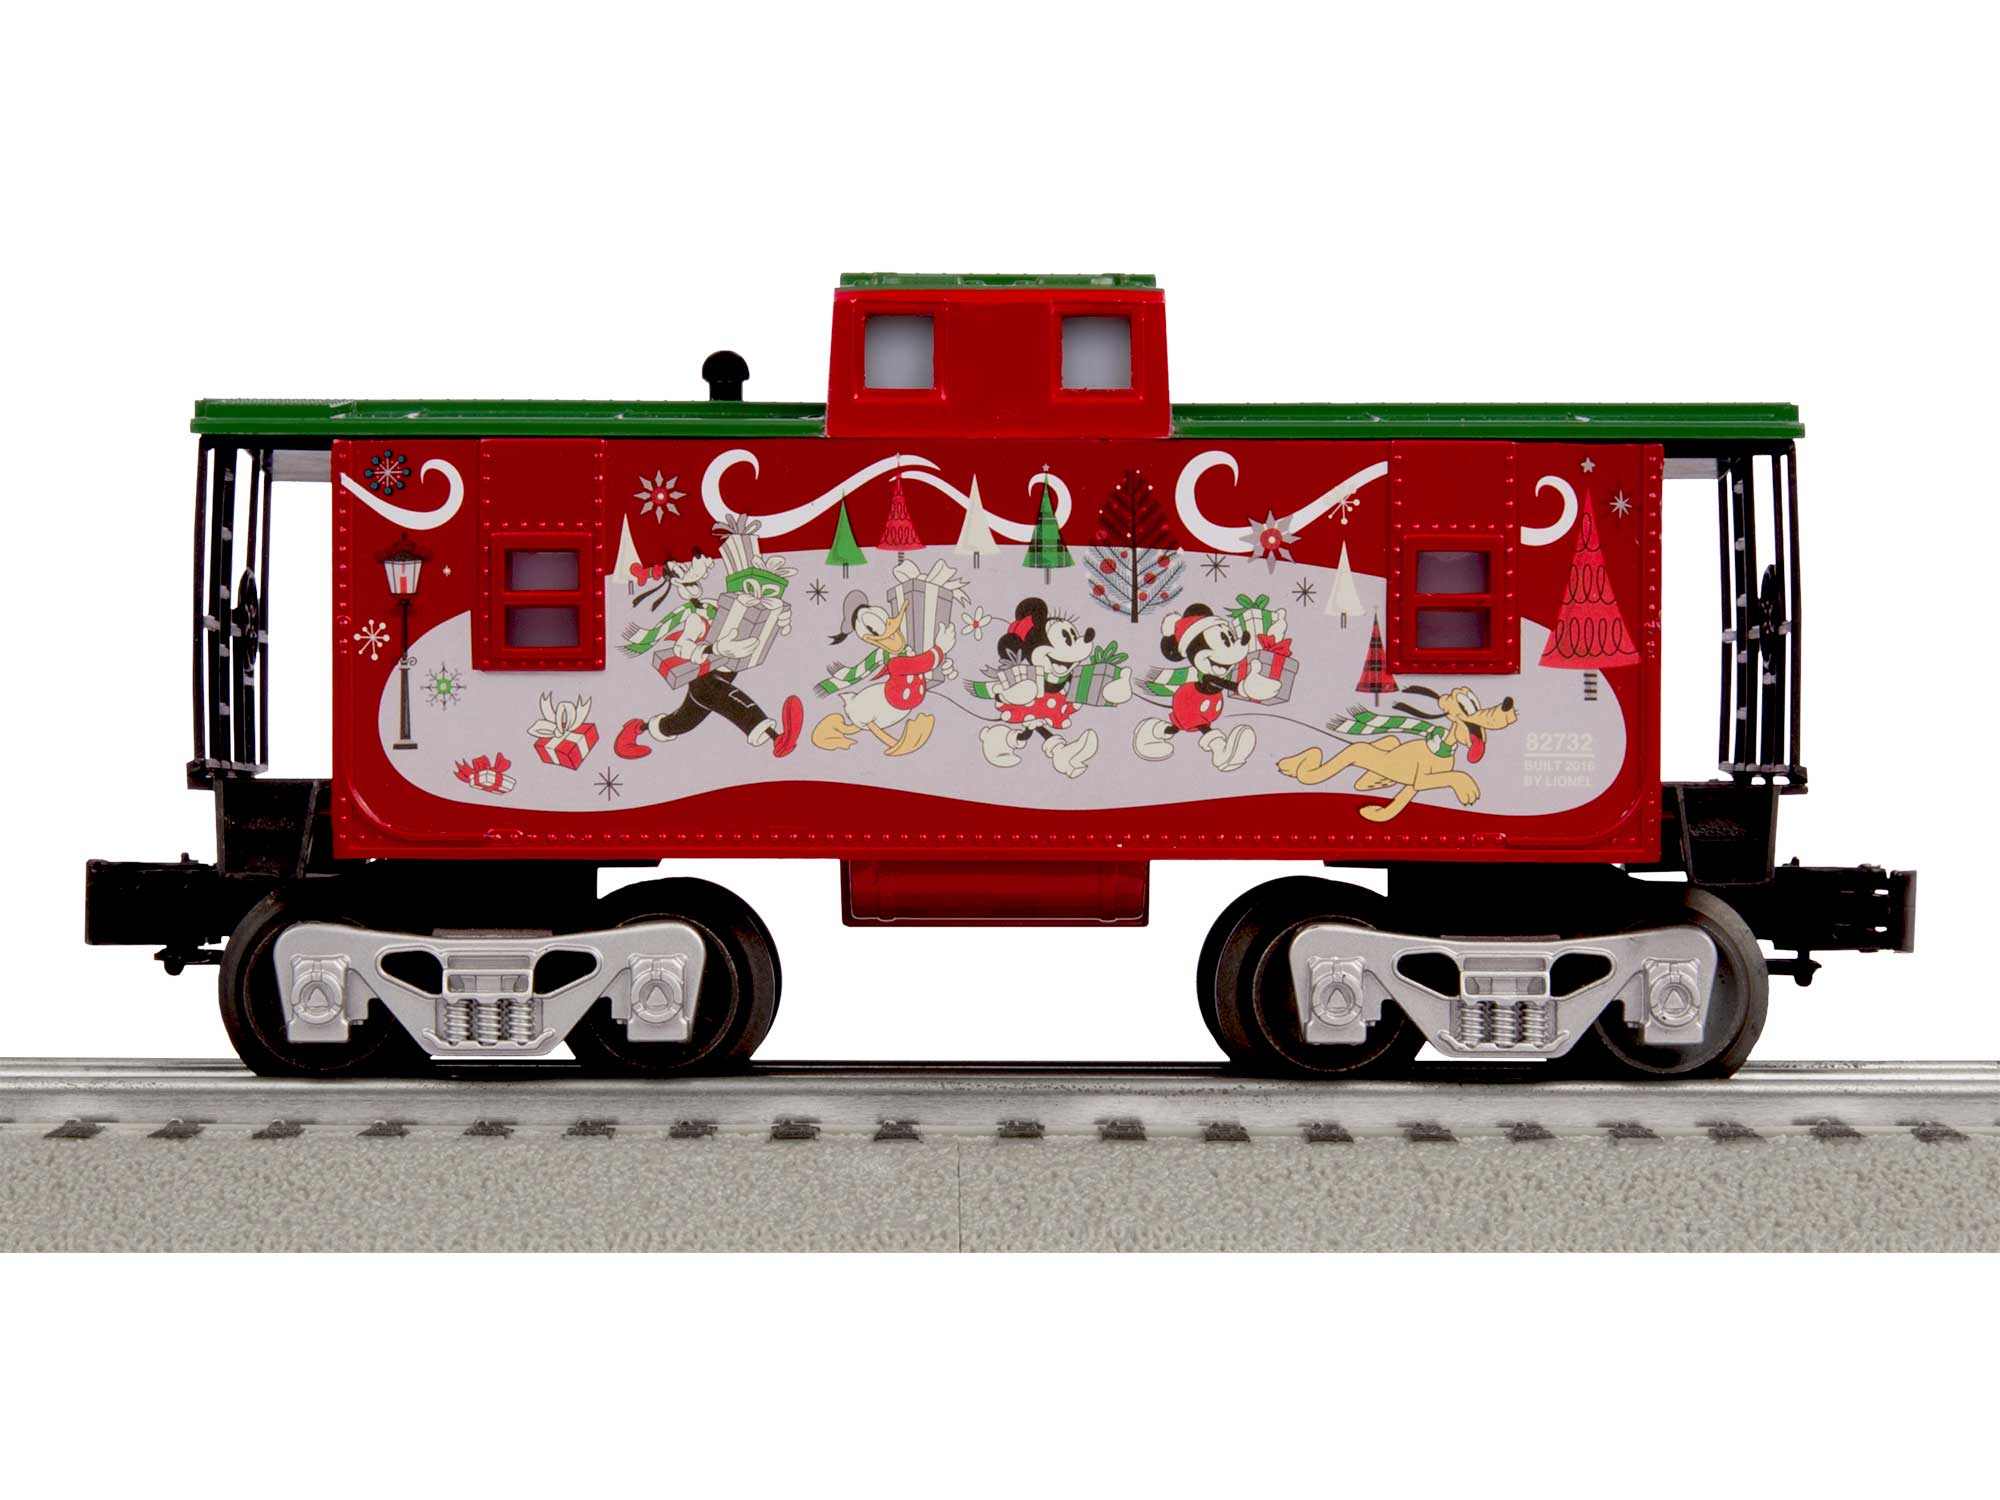 Lionel 36517 Mickey's Christmas Express Illuminated Caboose New in Box!